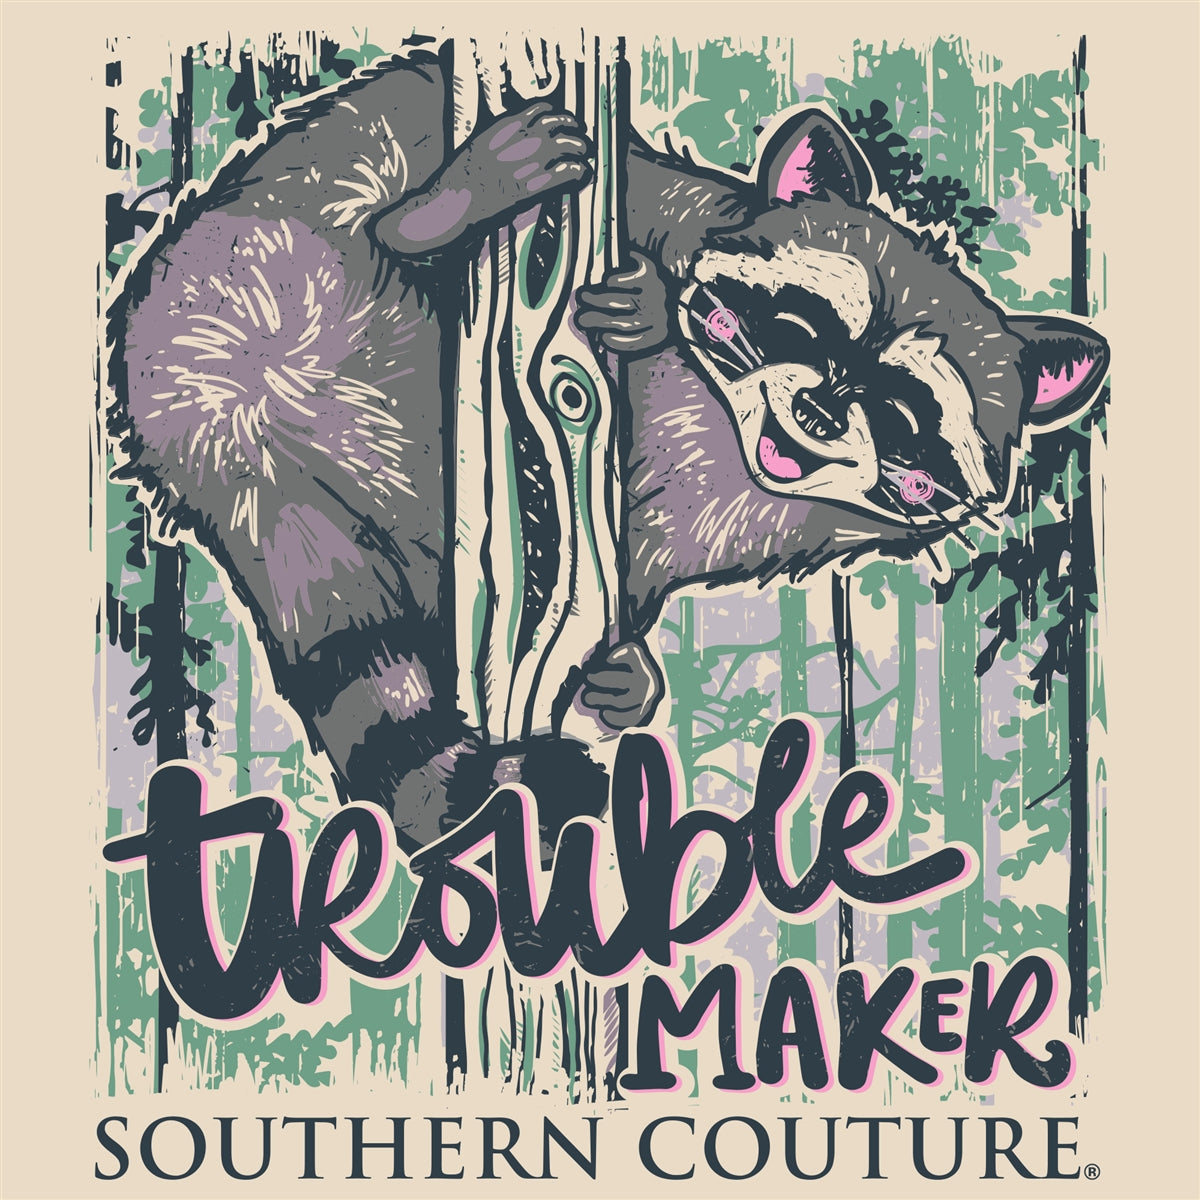 Troublemakers Clothing for Sale